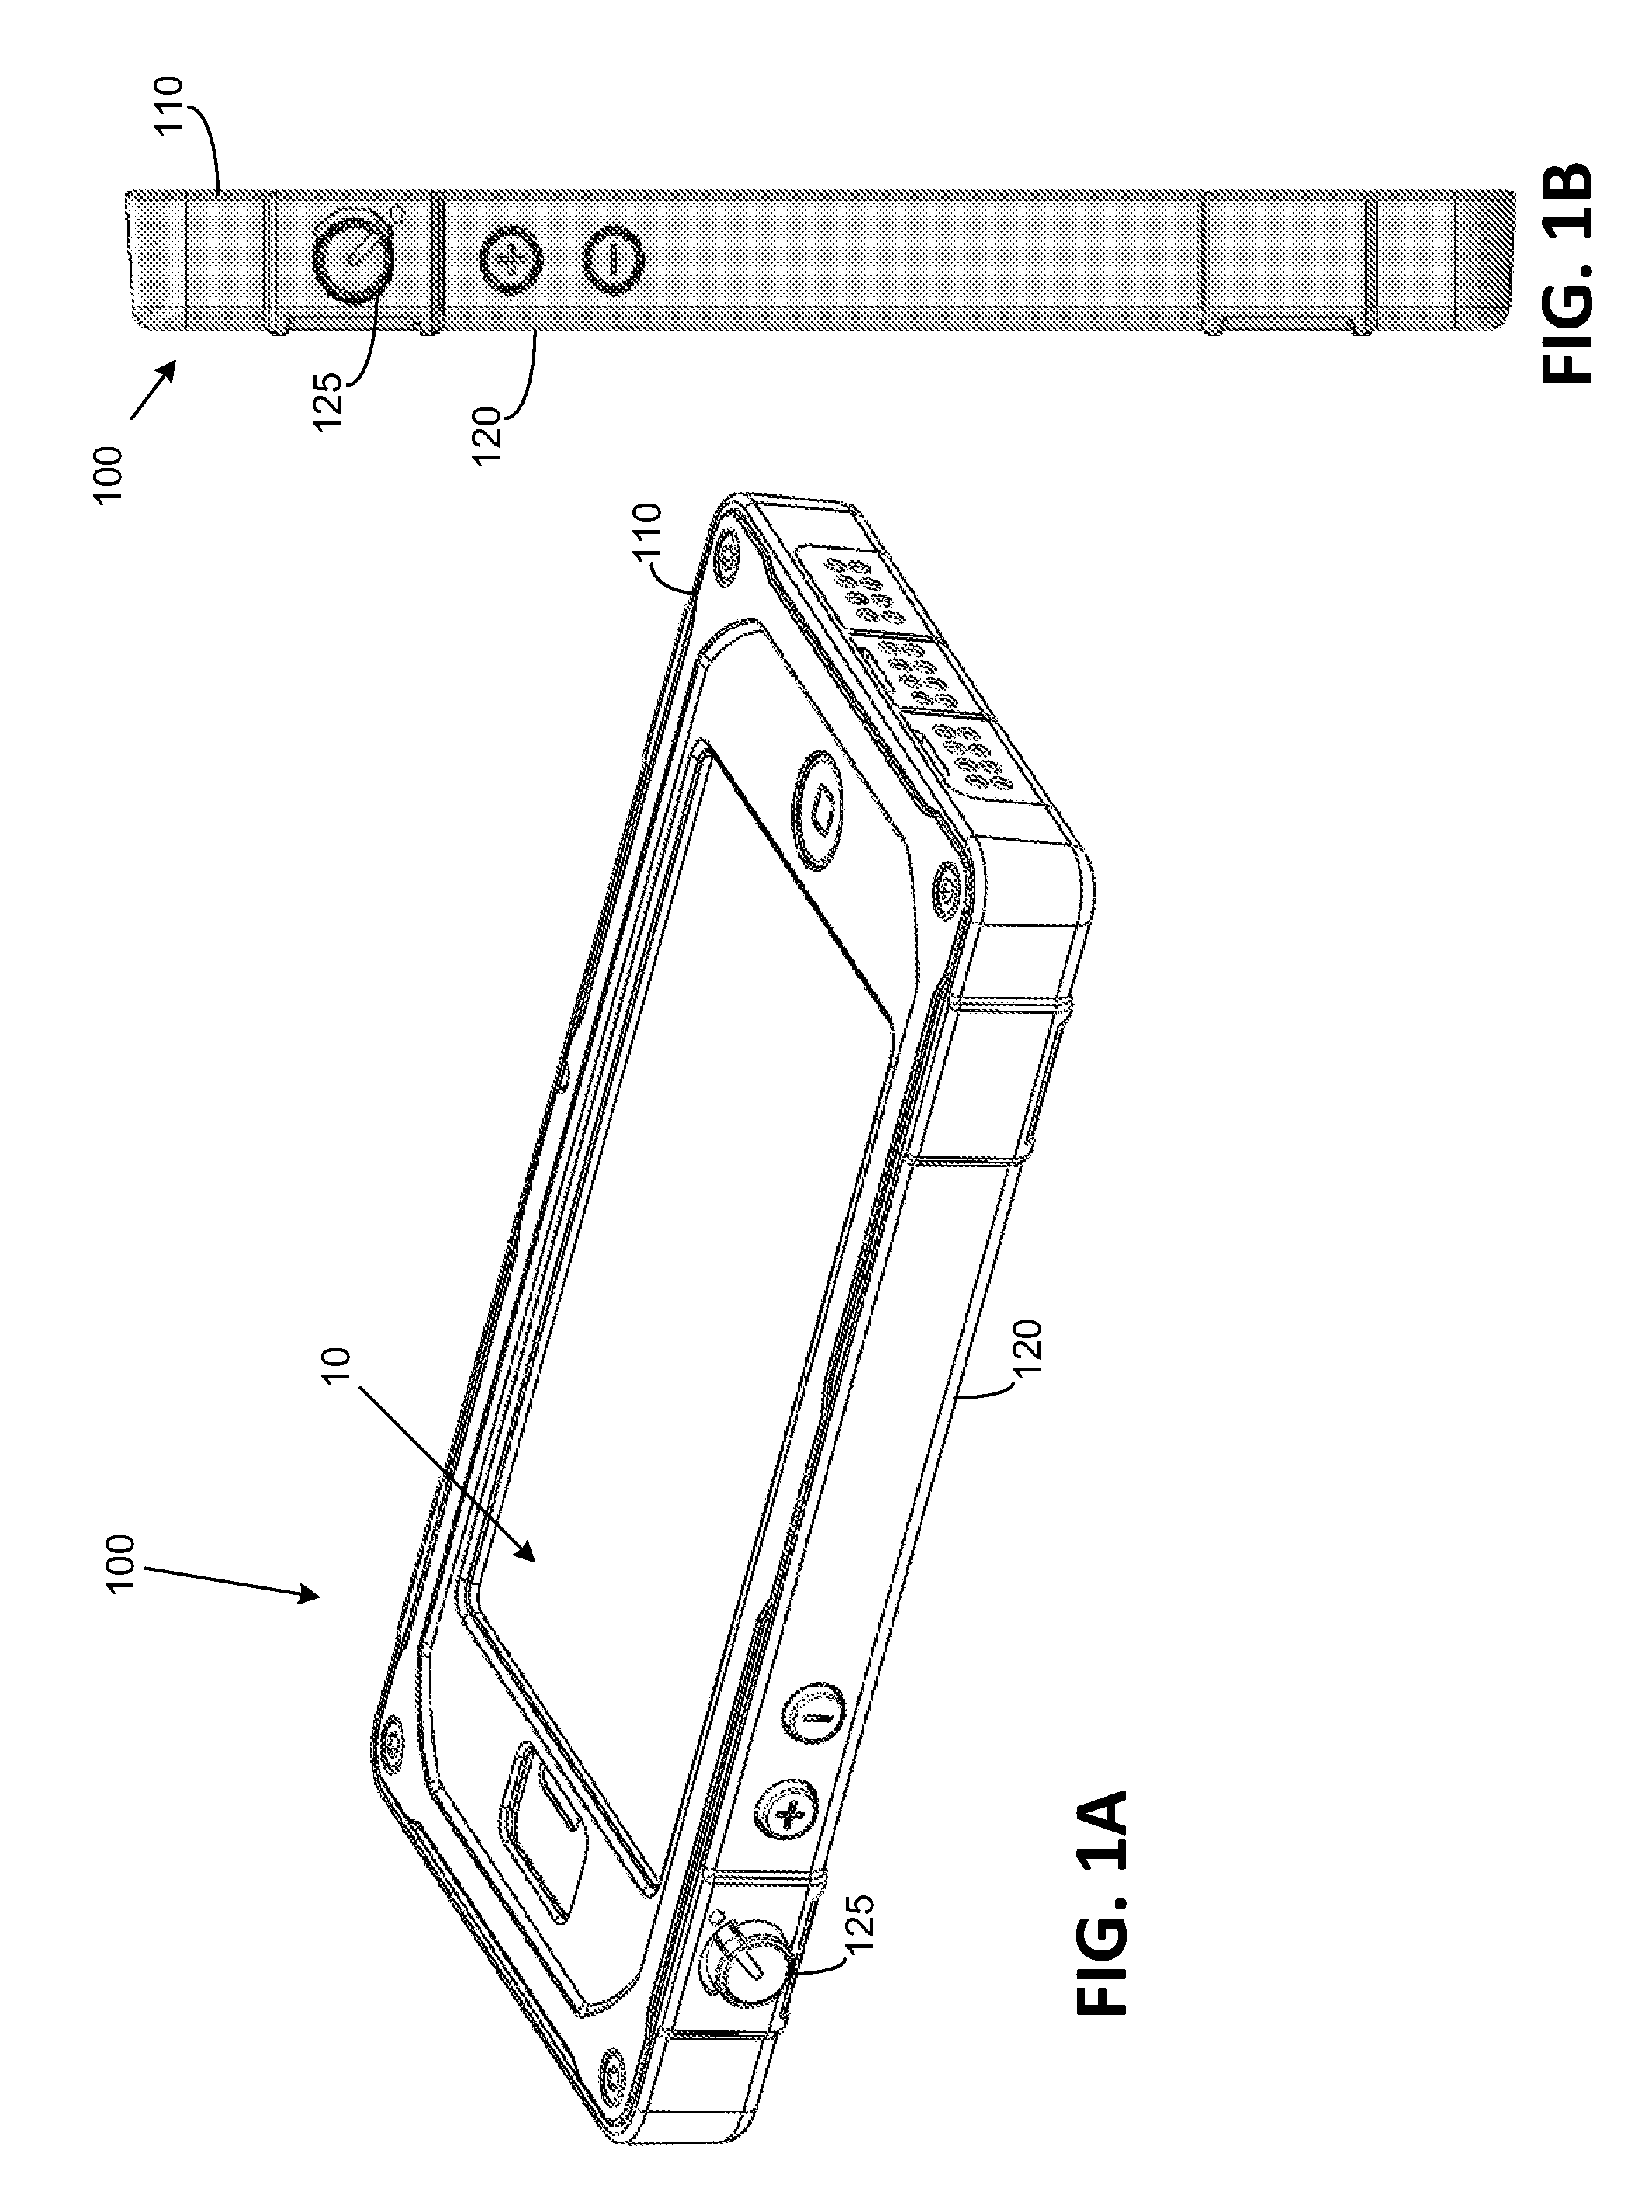 Protective cases for mobile electronic communication devices